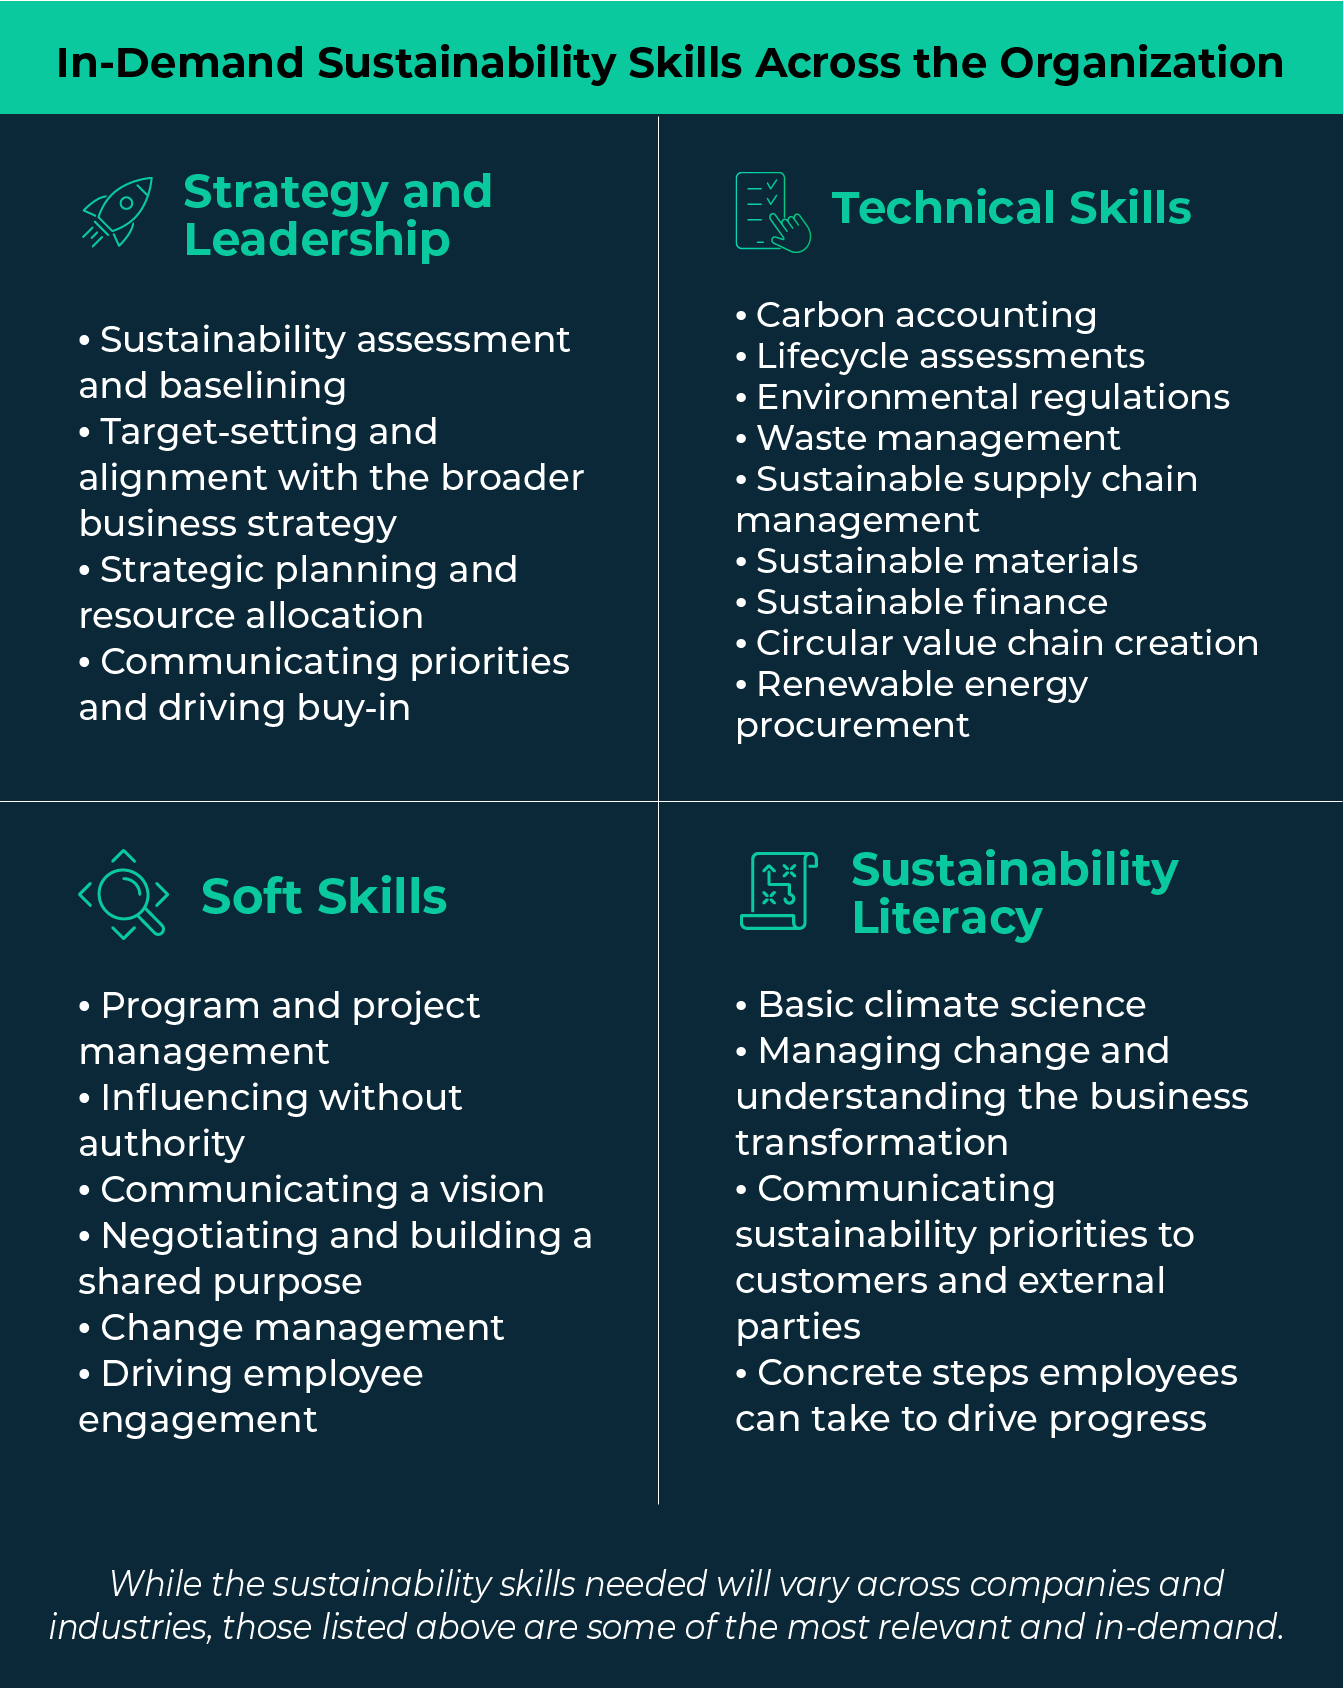 Graphic listing out key skills needed to drive organizational sustainability at all levels of the business.